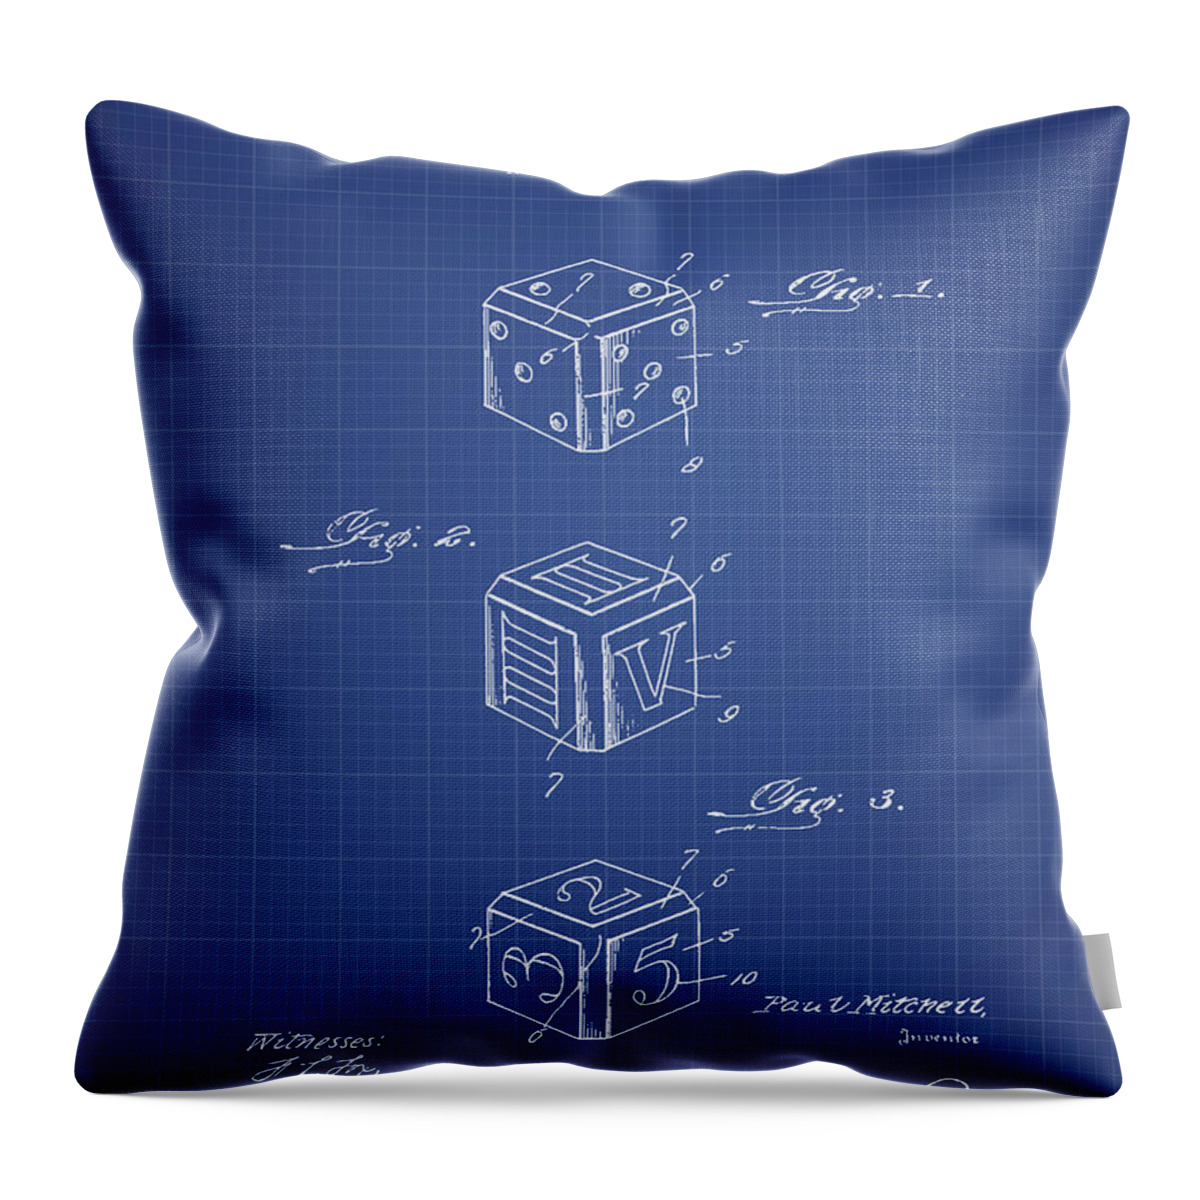 Dice Throw Pillow featuring the digital art Dice Apparatus Patent from 1925 - Blueprint by Aged Pixel